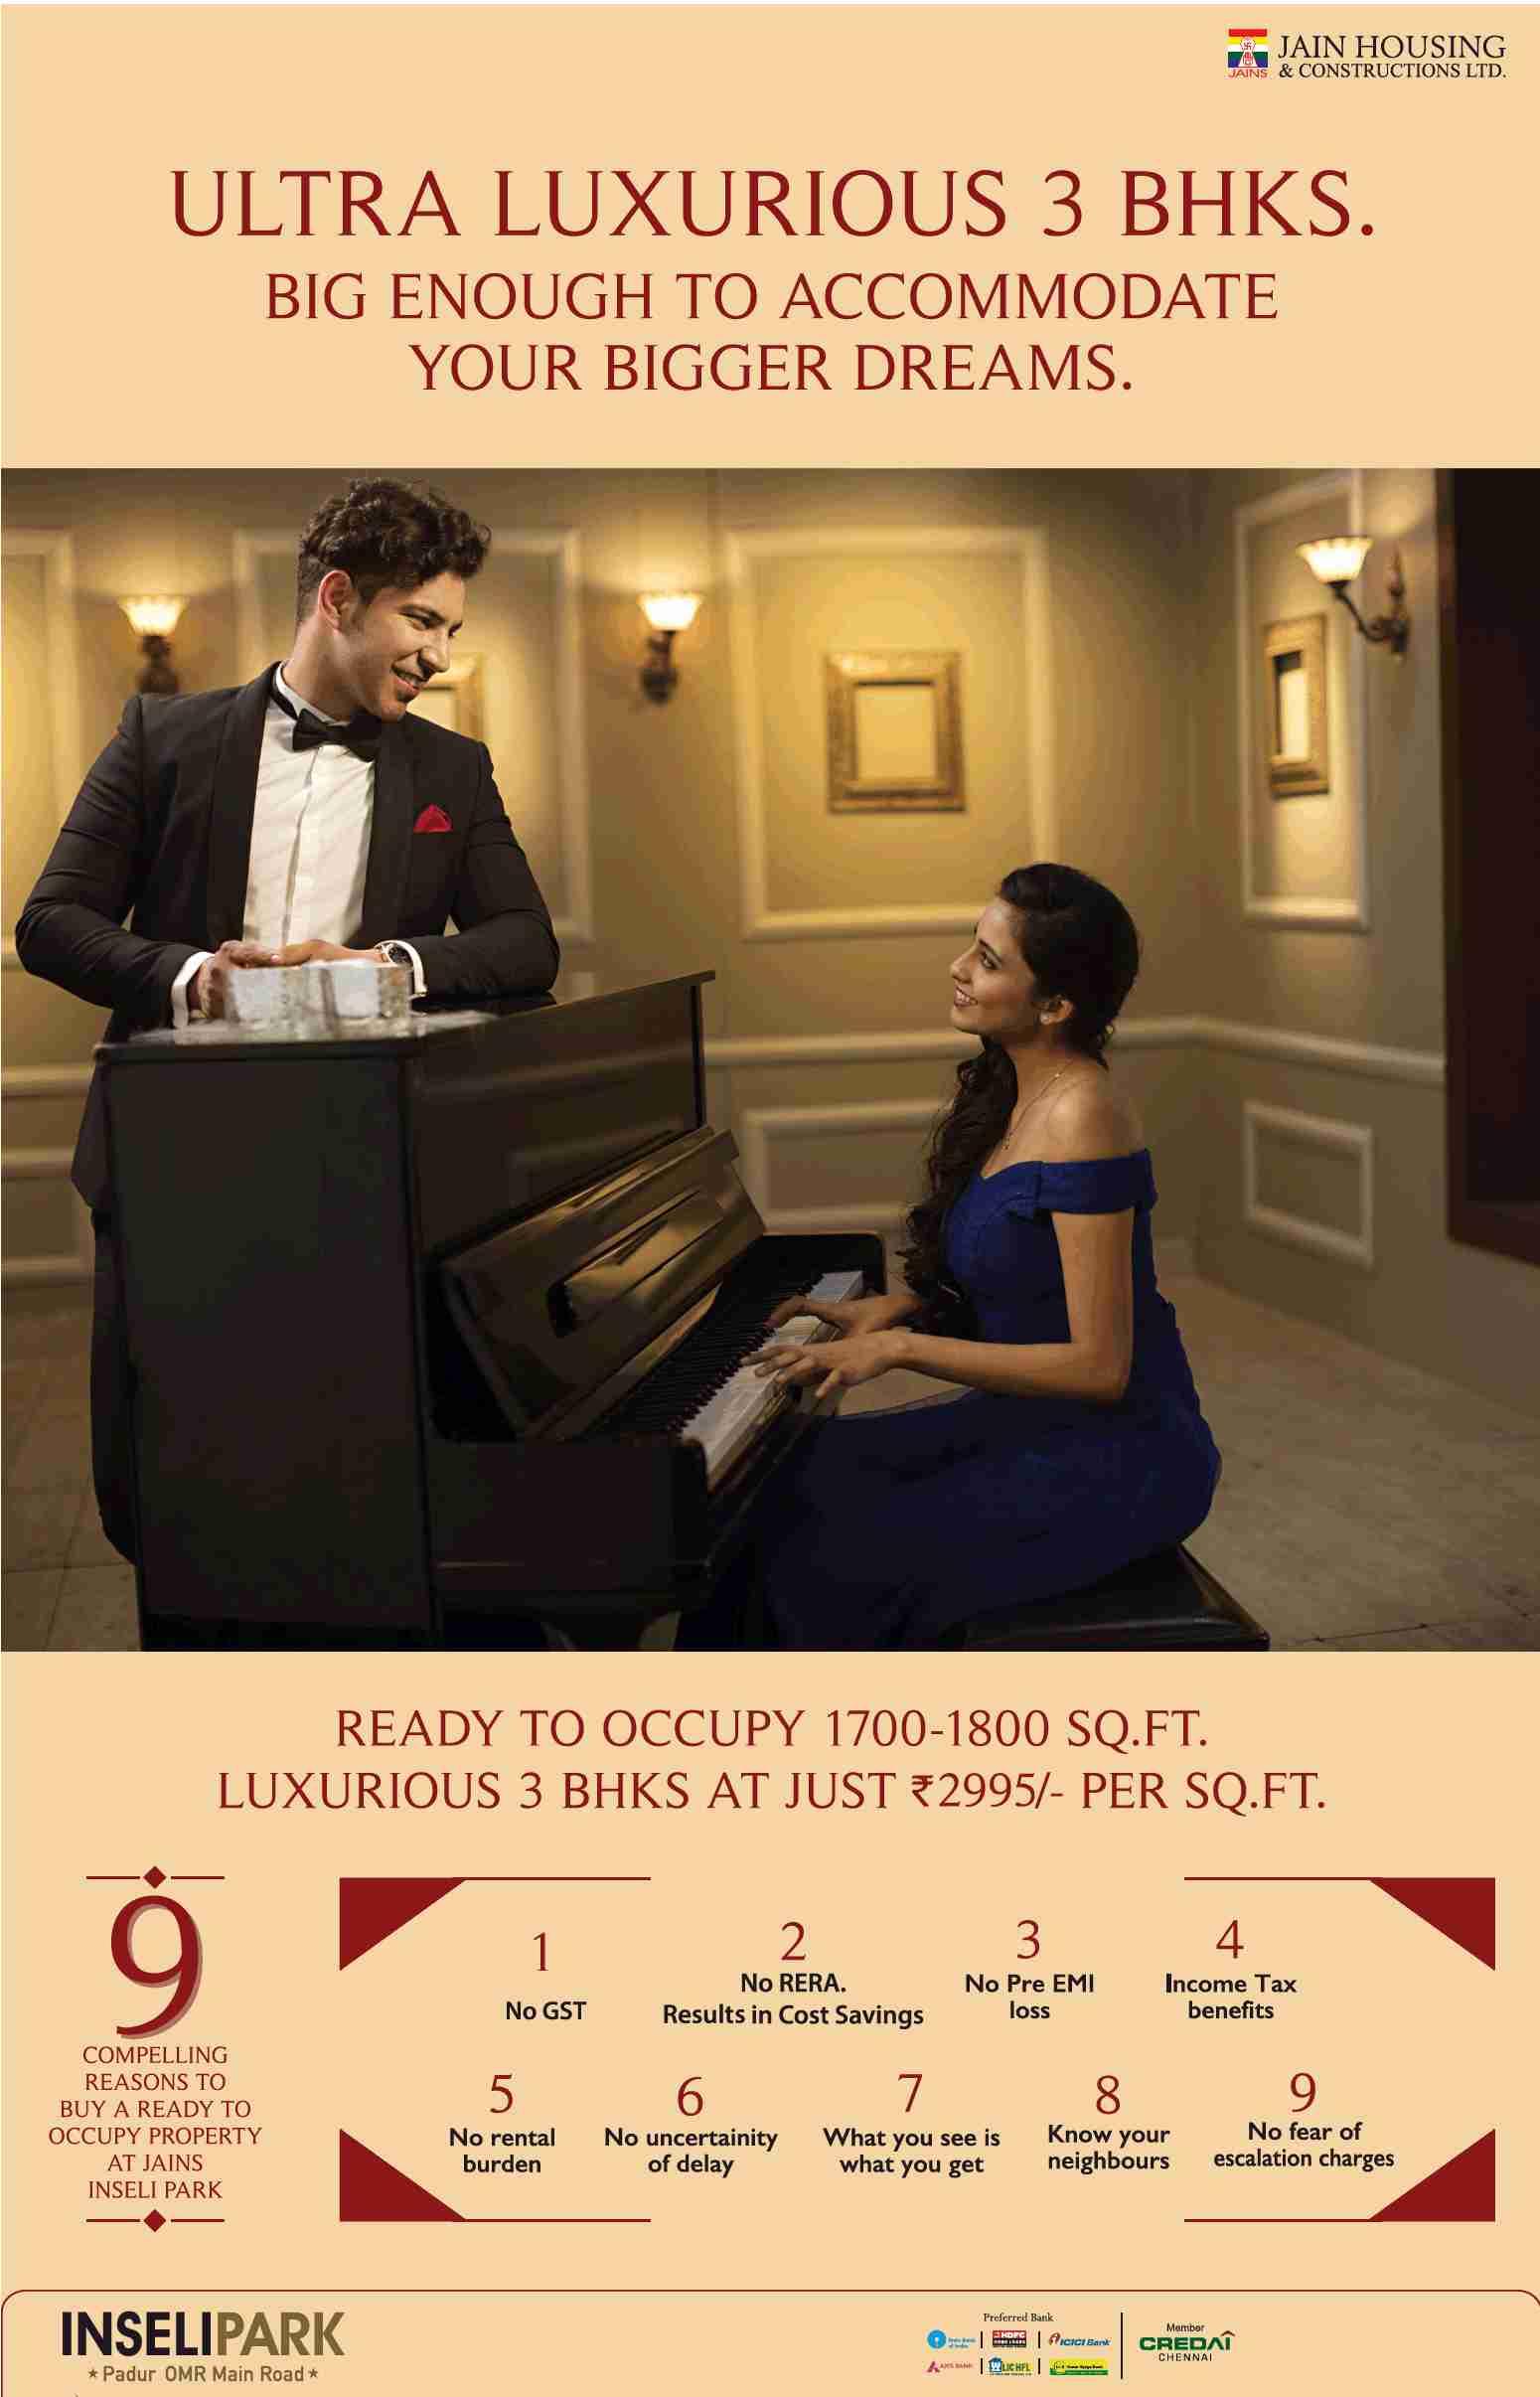 Book ready to occupy 3 BHK homes @ 2995 per sq.ft. at Jain Inseli Park in Chennai